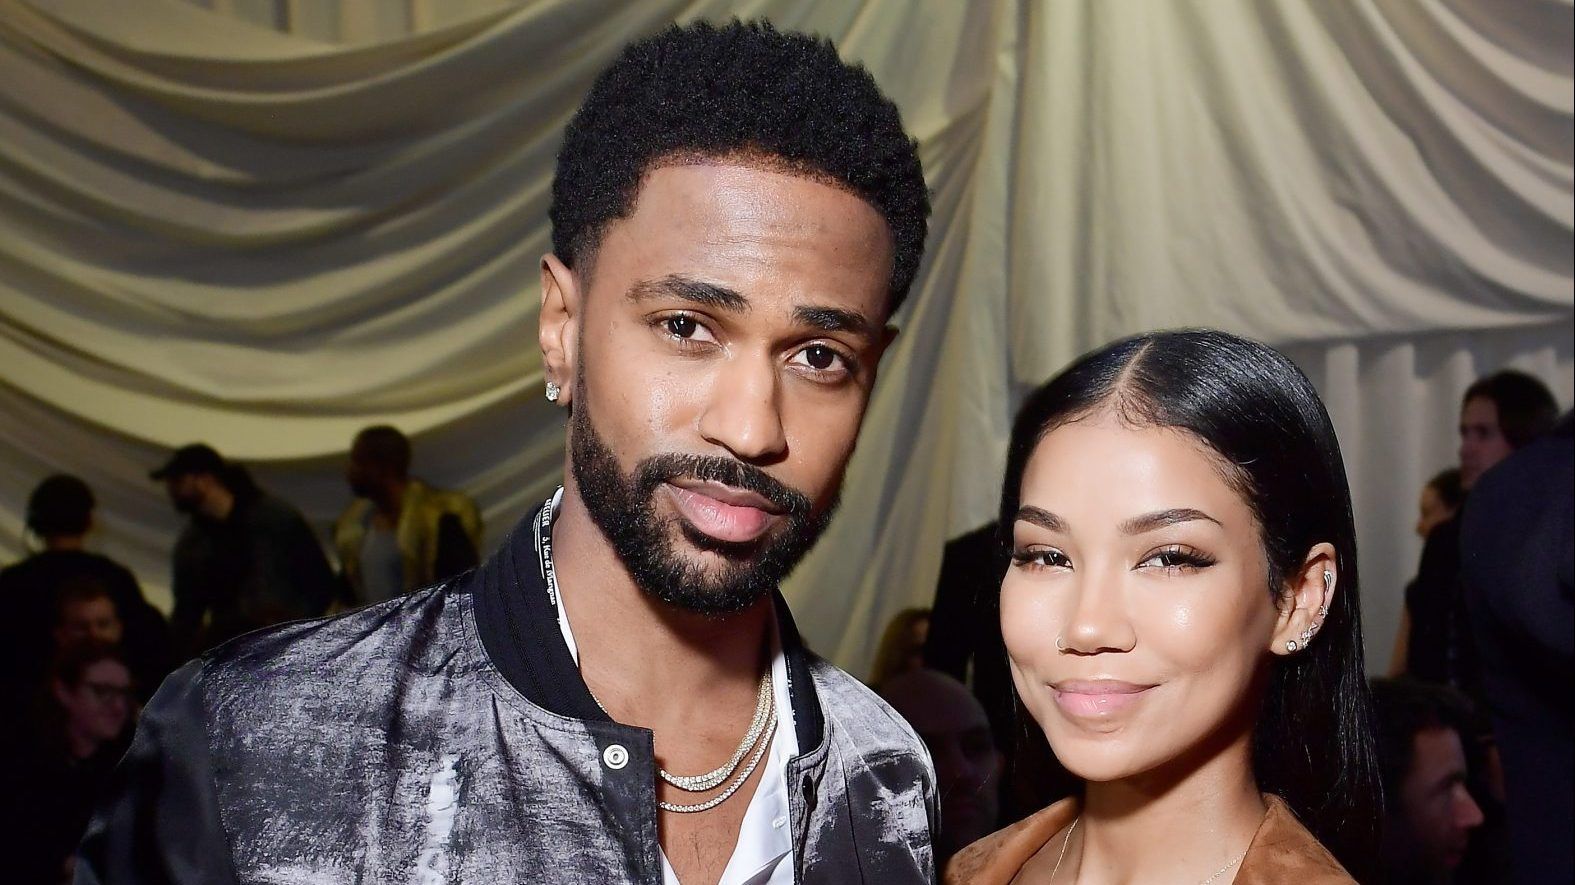 Is Big Sean Single? He and GF Jhene Aiko Split After 3 Years